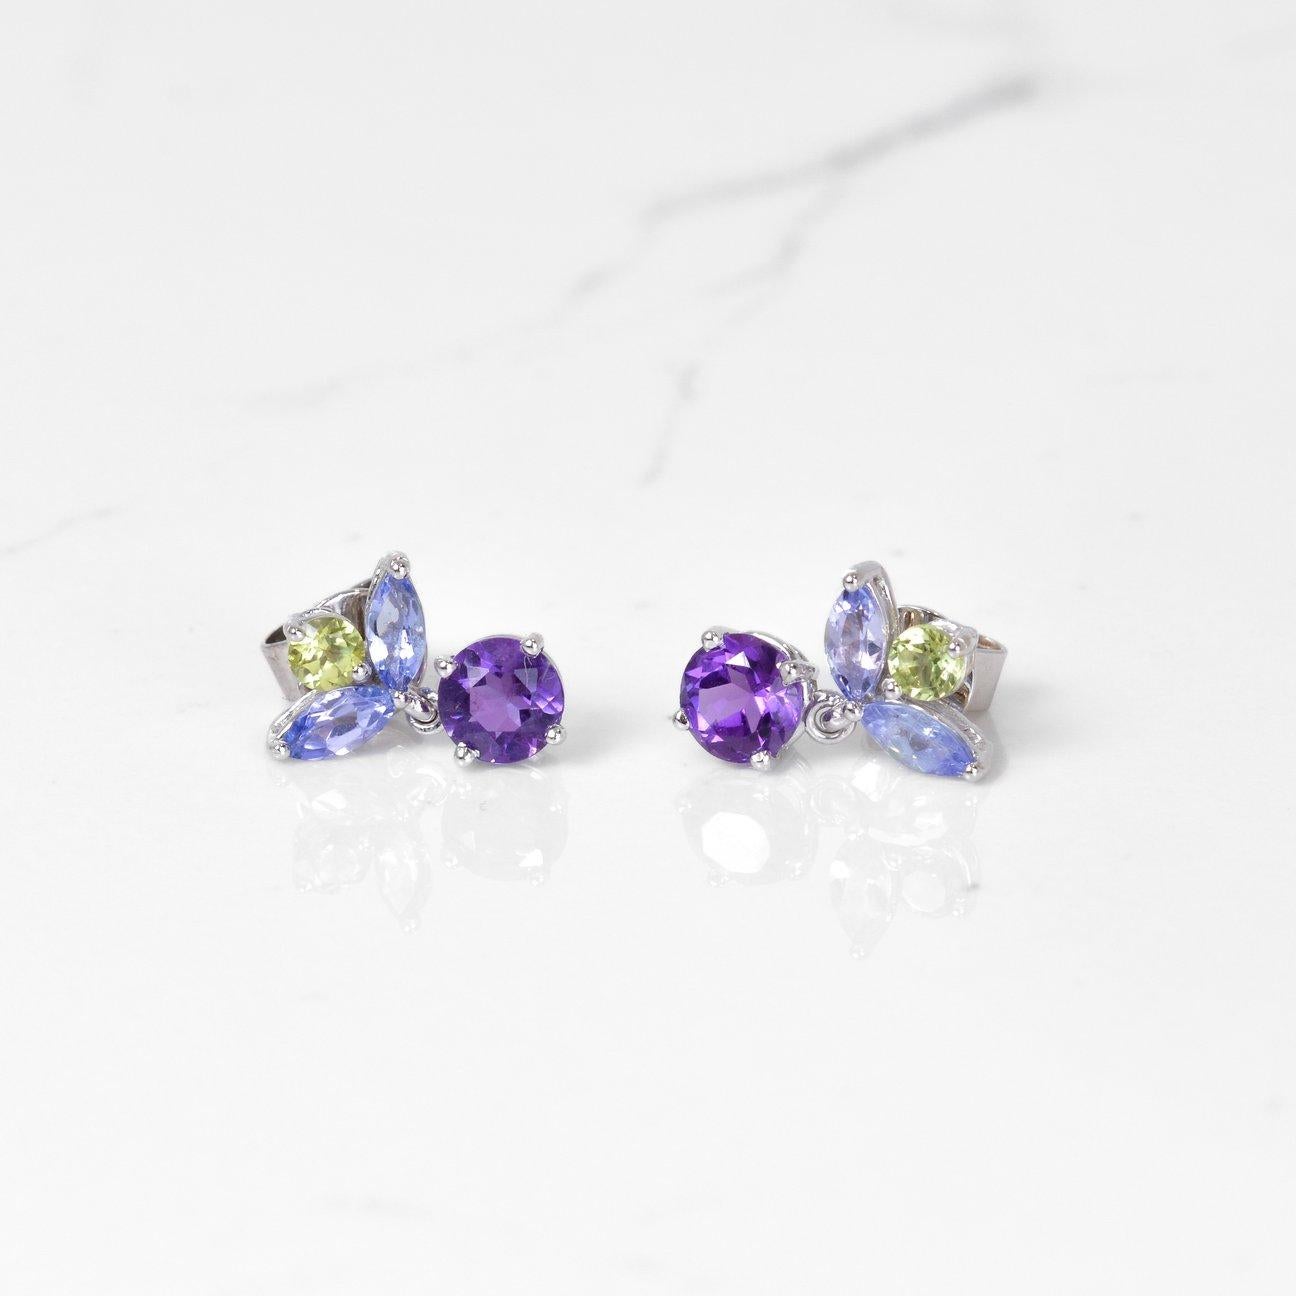 Pretty in purple! These beautiful earrings consist of gorgeous amethyst, tanzanite, and peridot gemstones, all set in 14k white gold. These earrings measure 12.6mm in length